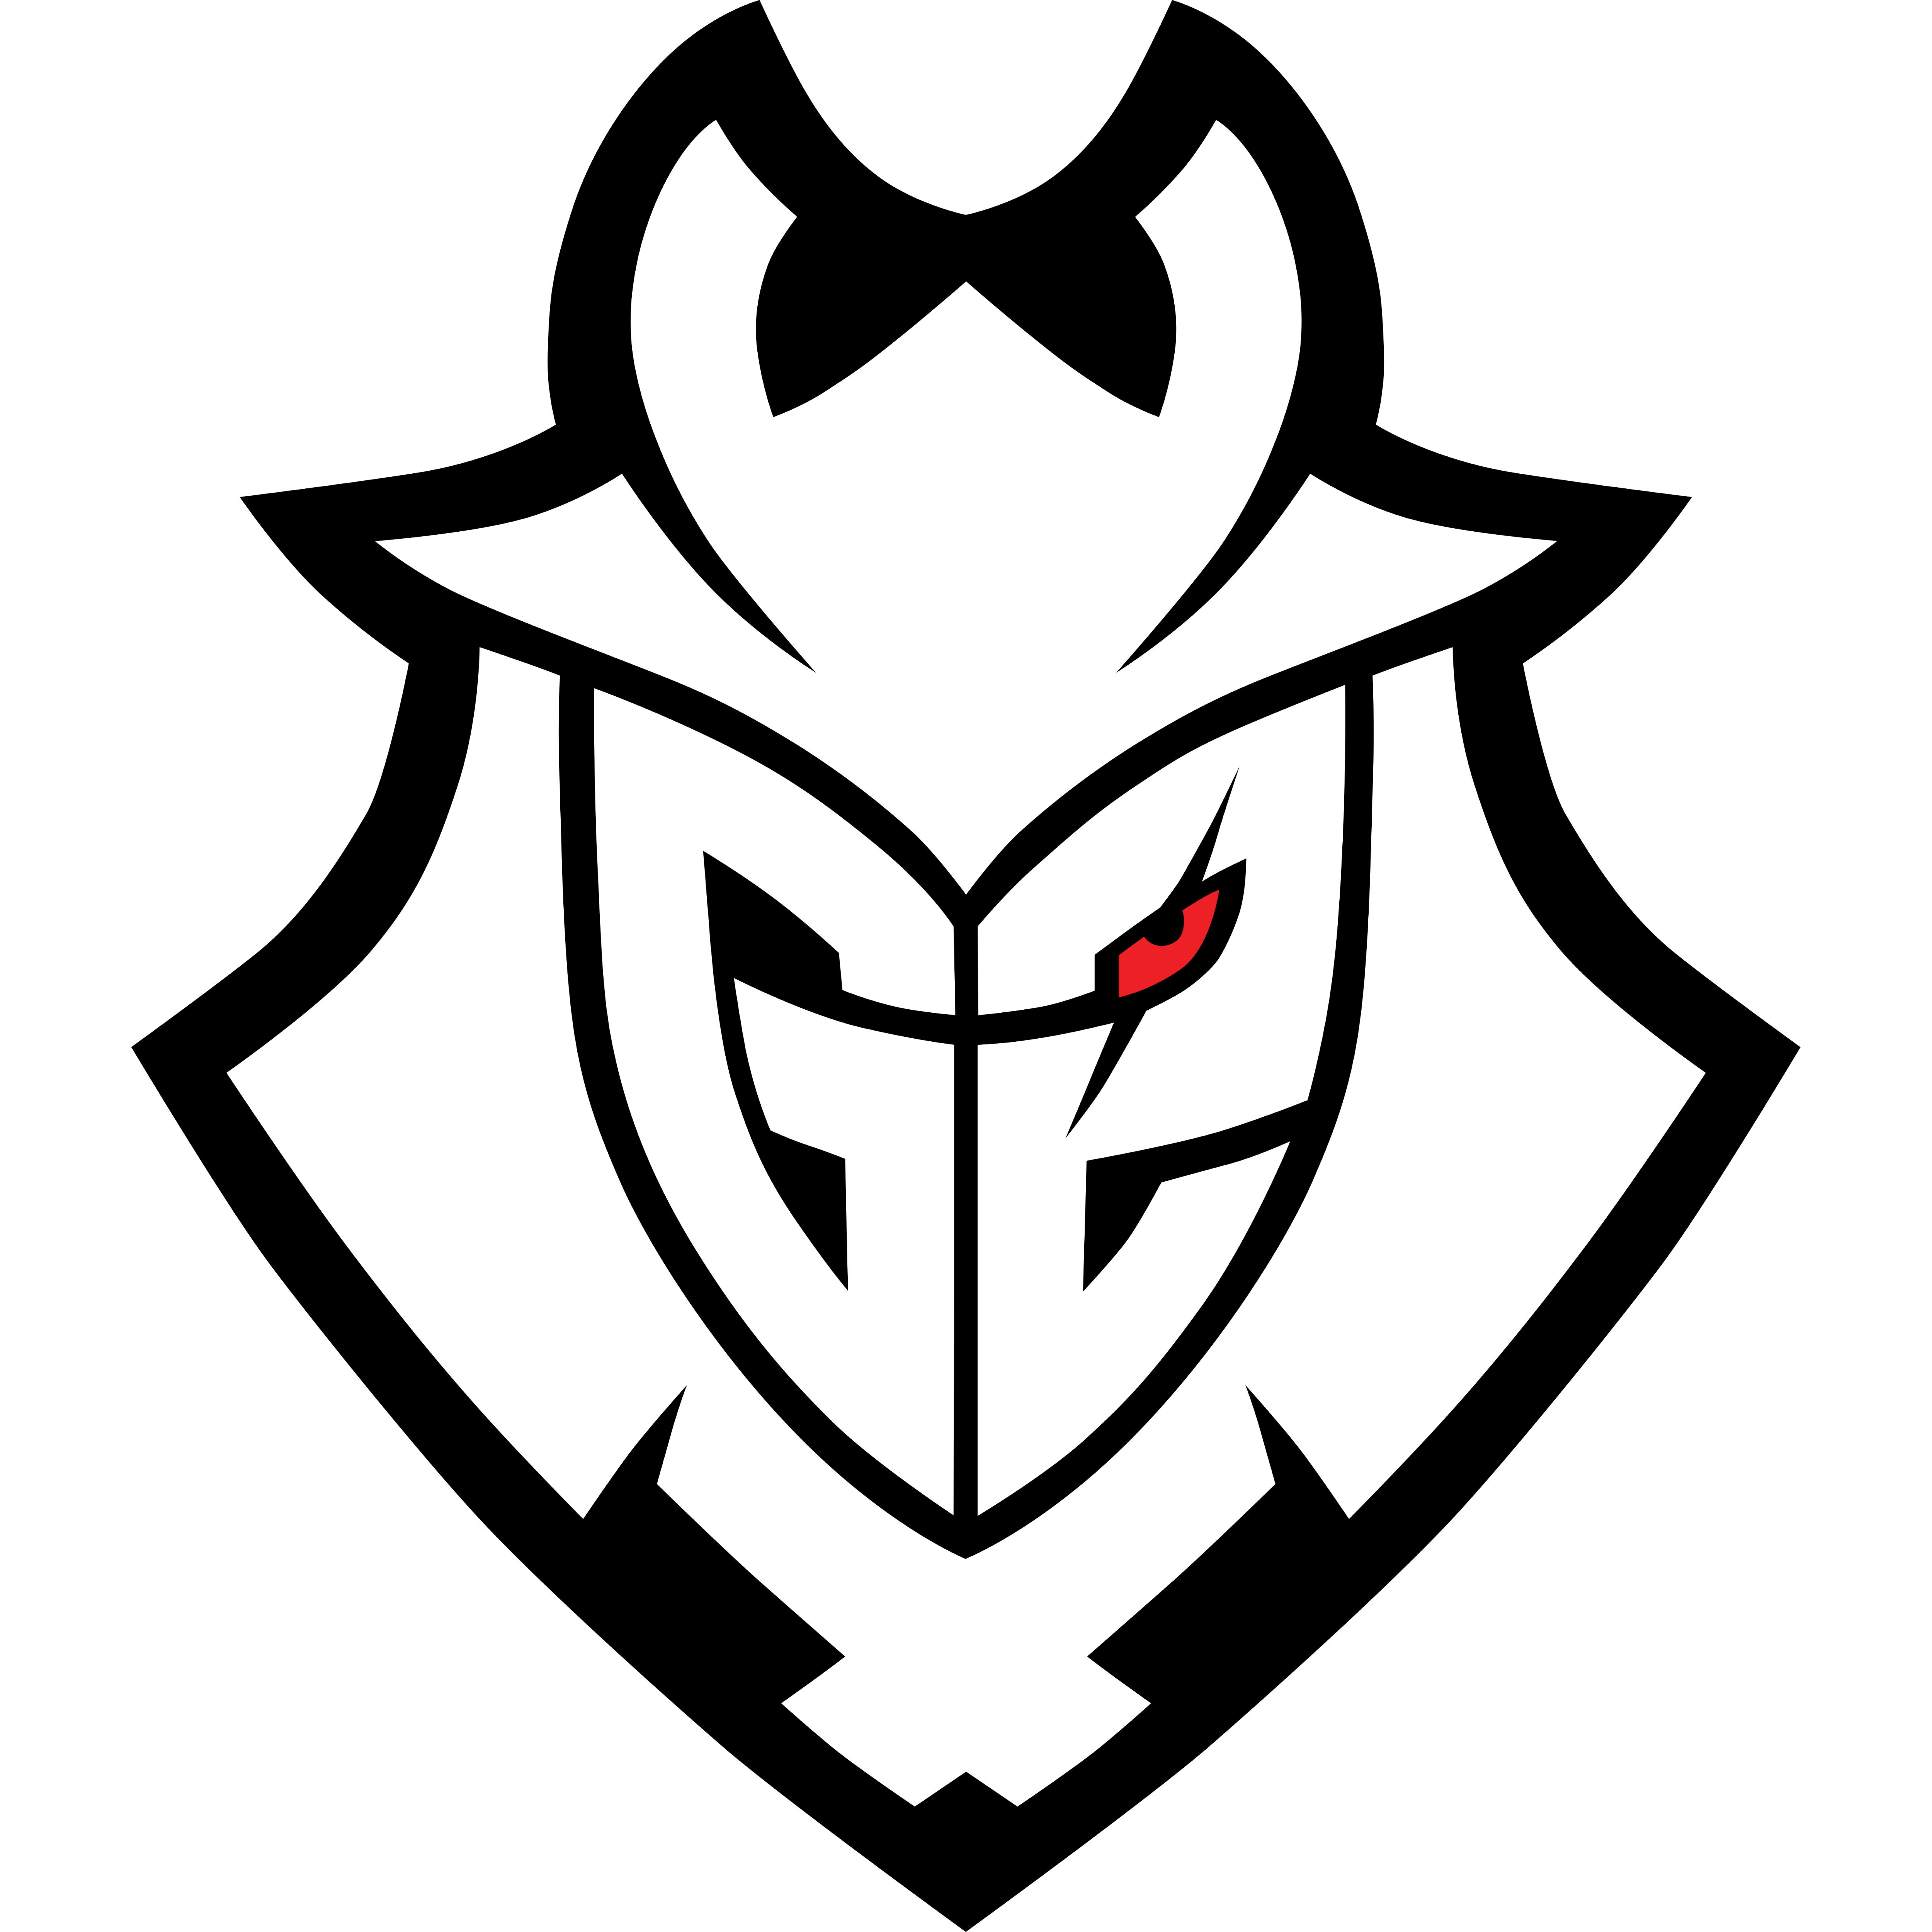 What happened to G2 Esports